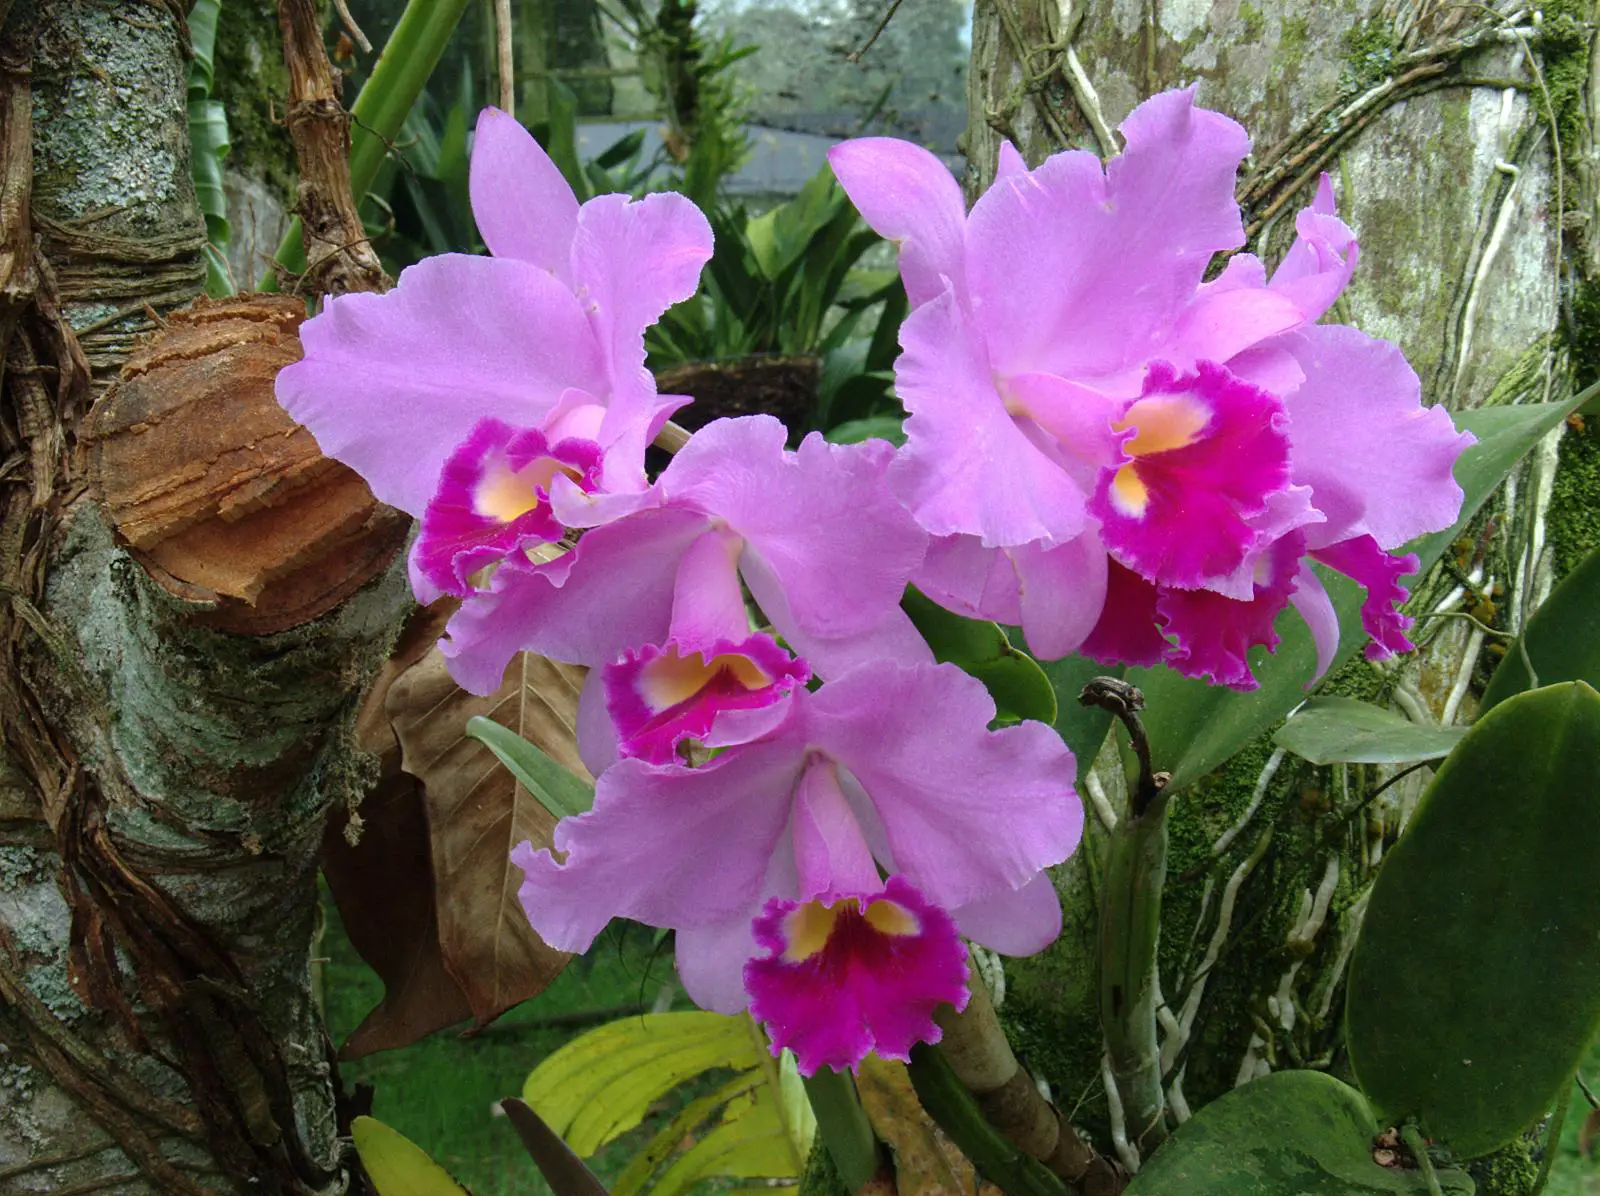 Helpful Tips for Growing Orchids